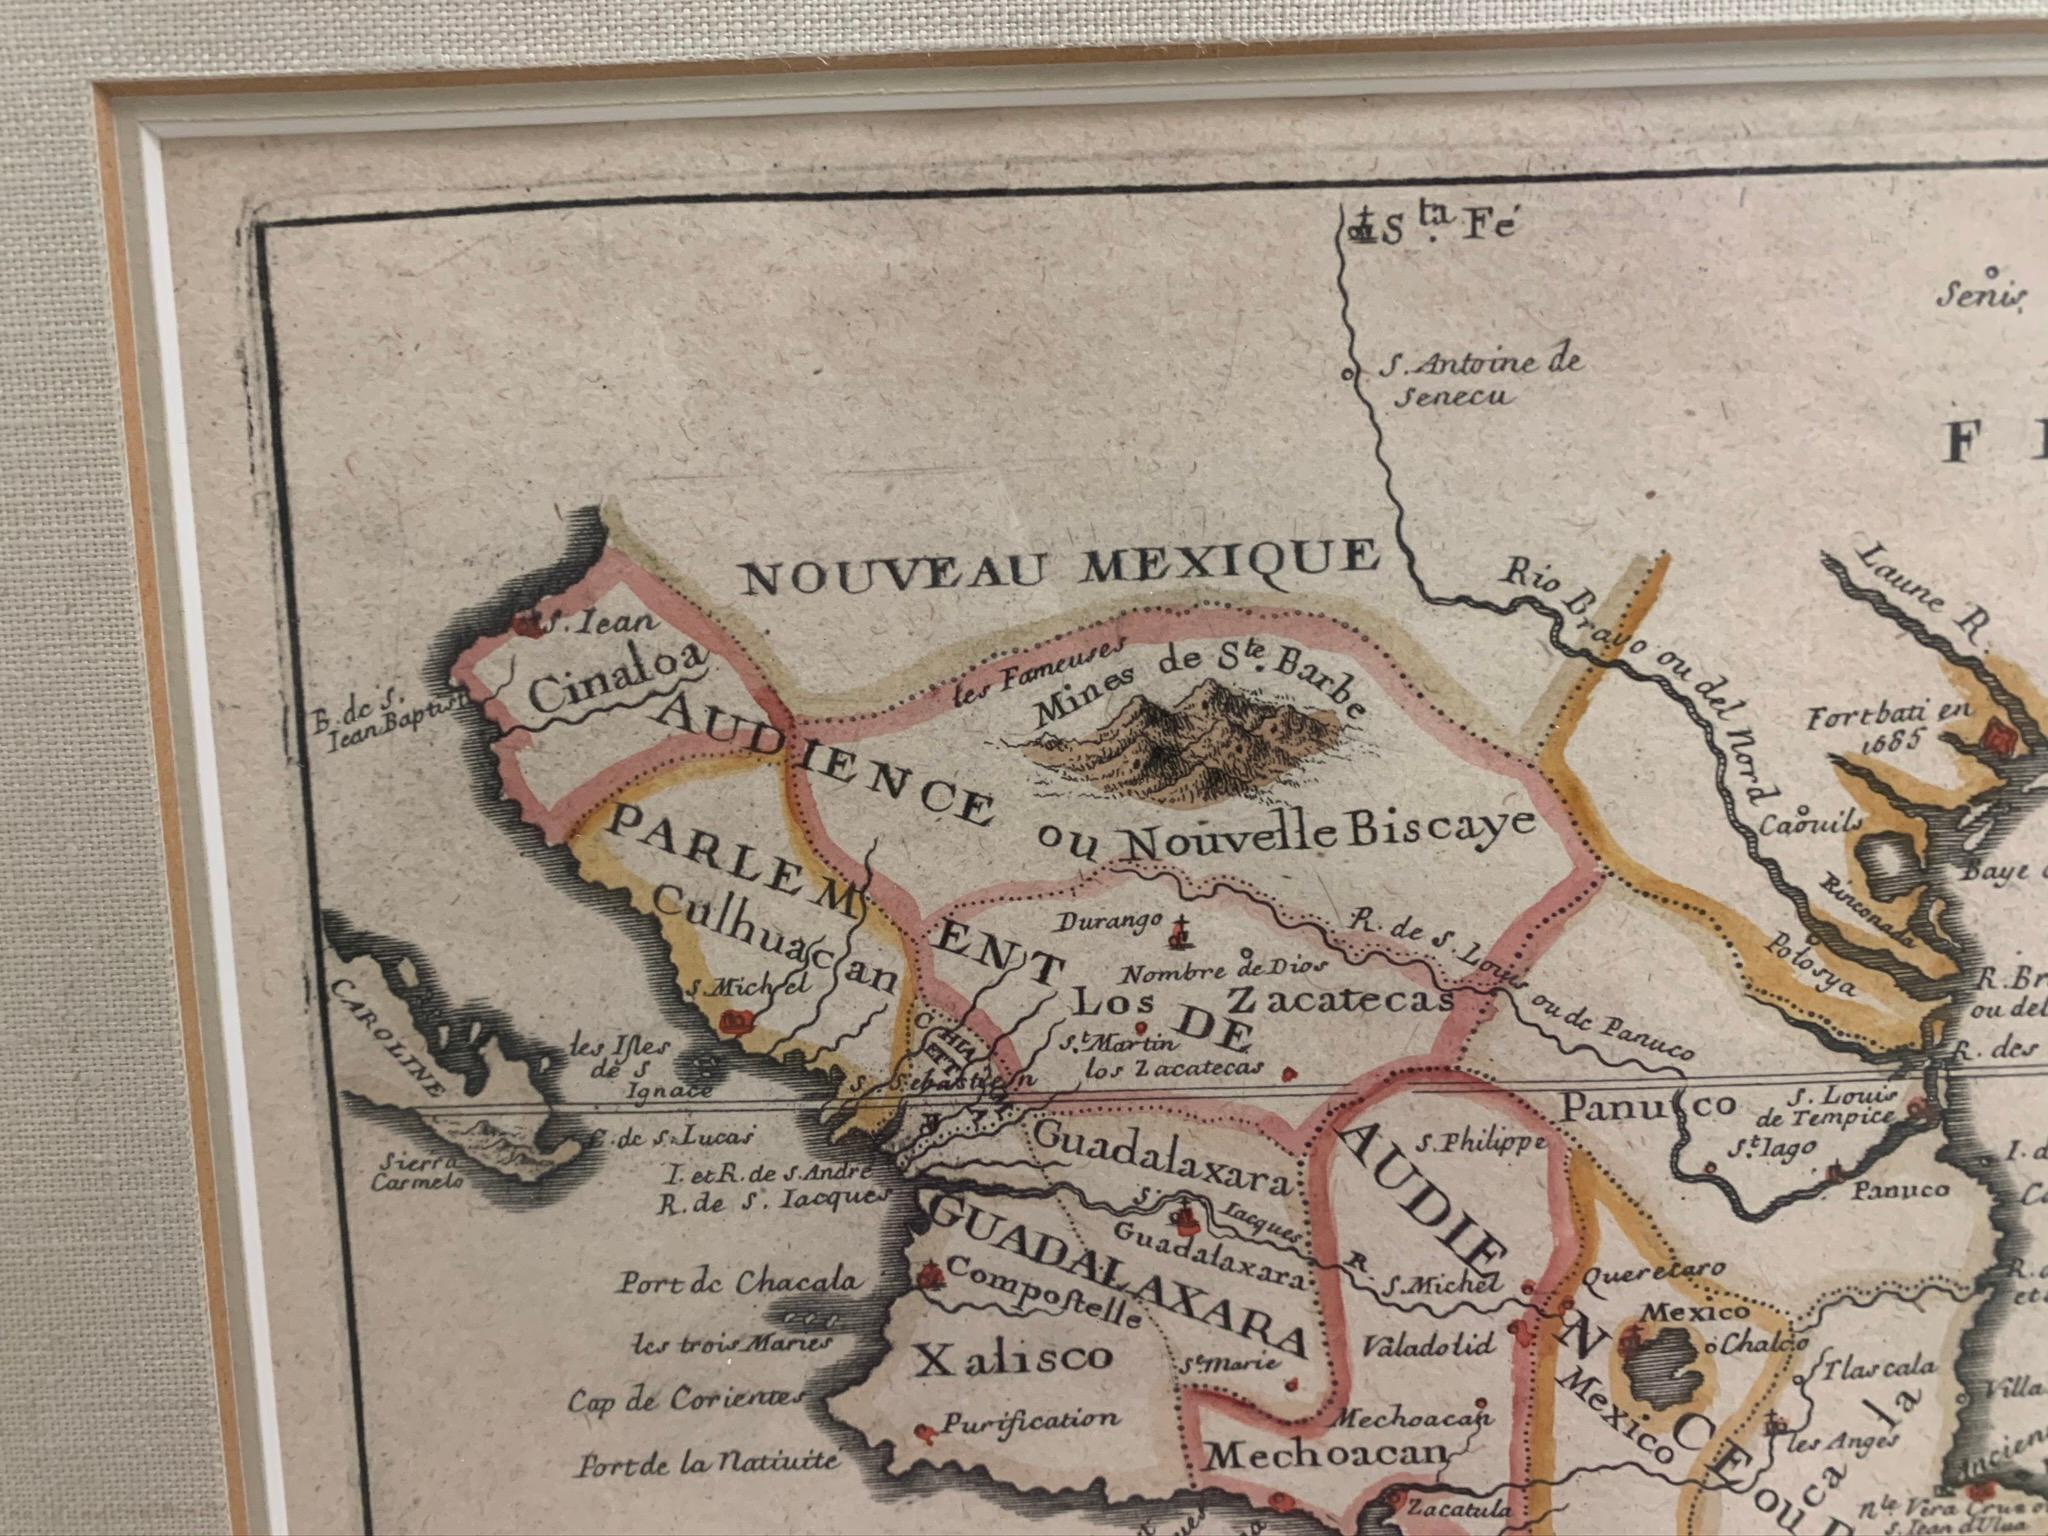 Framed map of Mexico & Florida circa 1705, Paris. Small map with Mexico and the Gulf Coast. Inset text indicating Panama, Acapulco, Mexico City and the Mississippi. Extends North to Santa Fe. Framed in a carved brown wood frame.